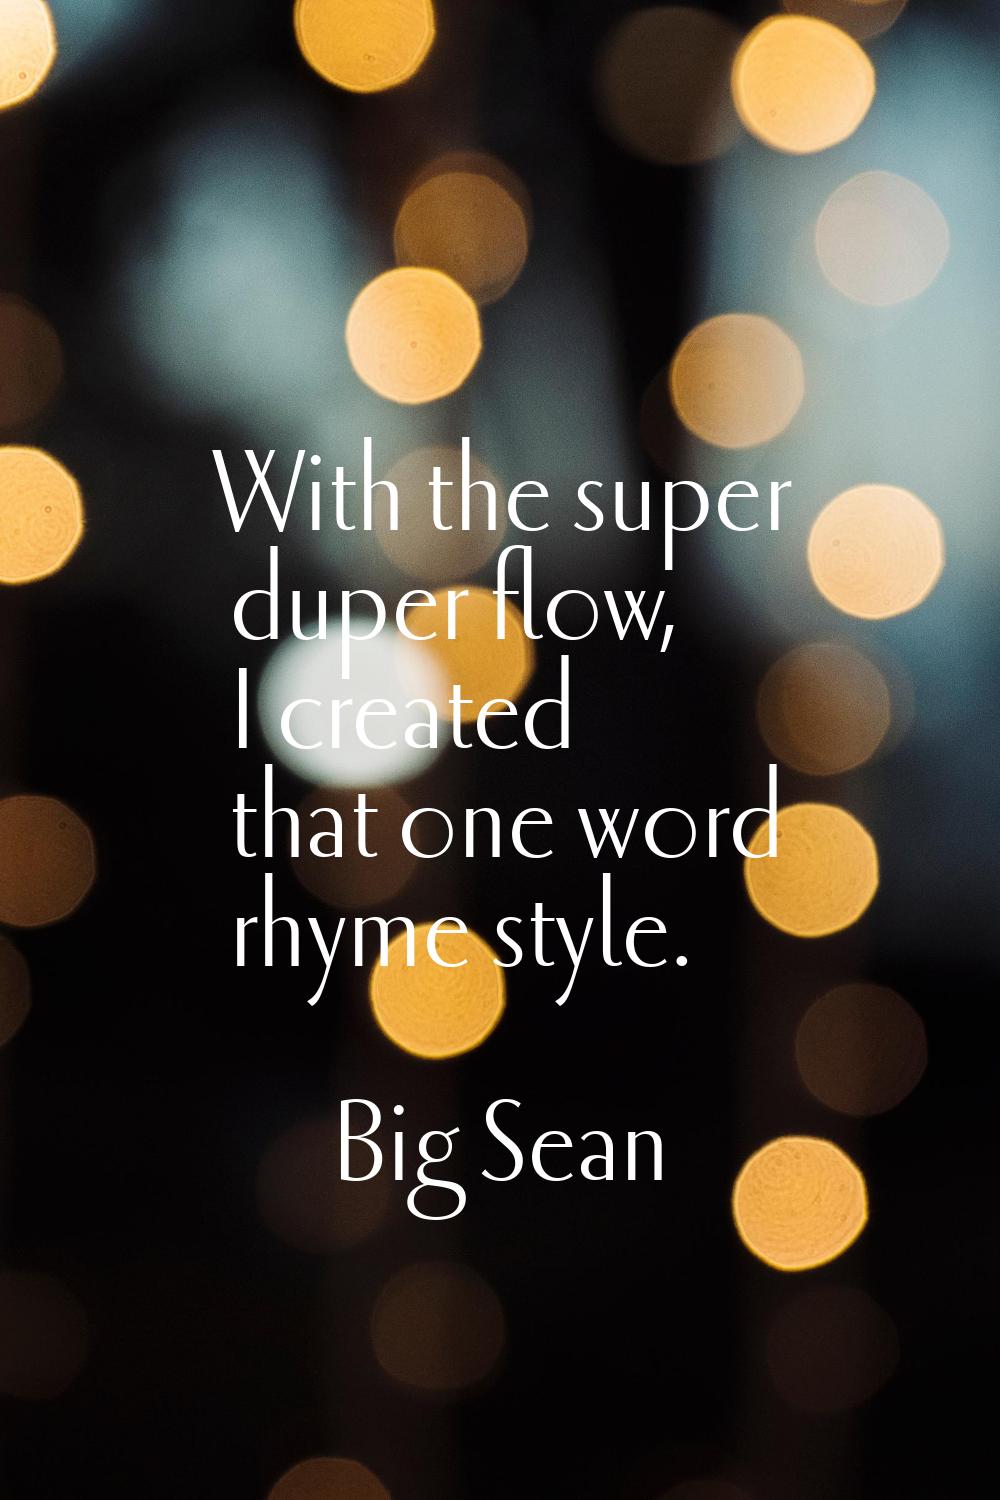 With the super duper flow, I created that one word rhyme style.